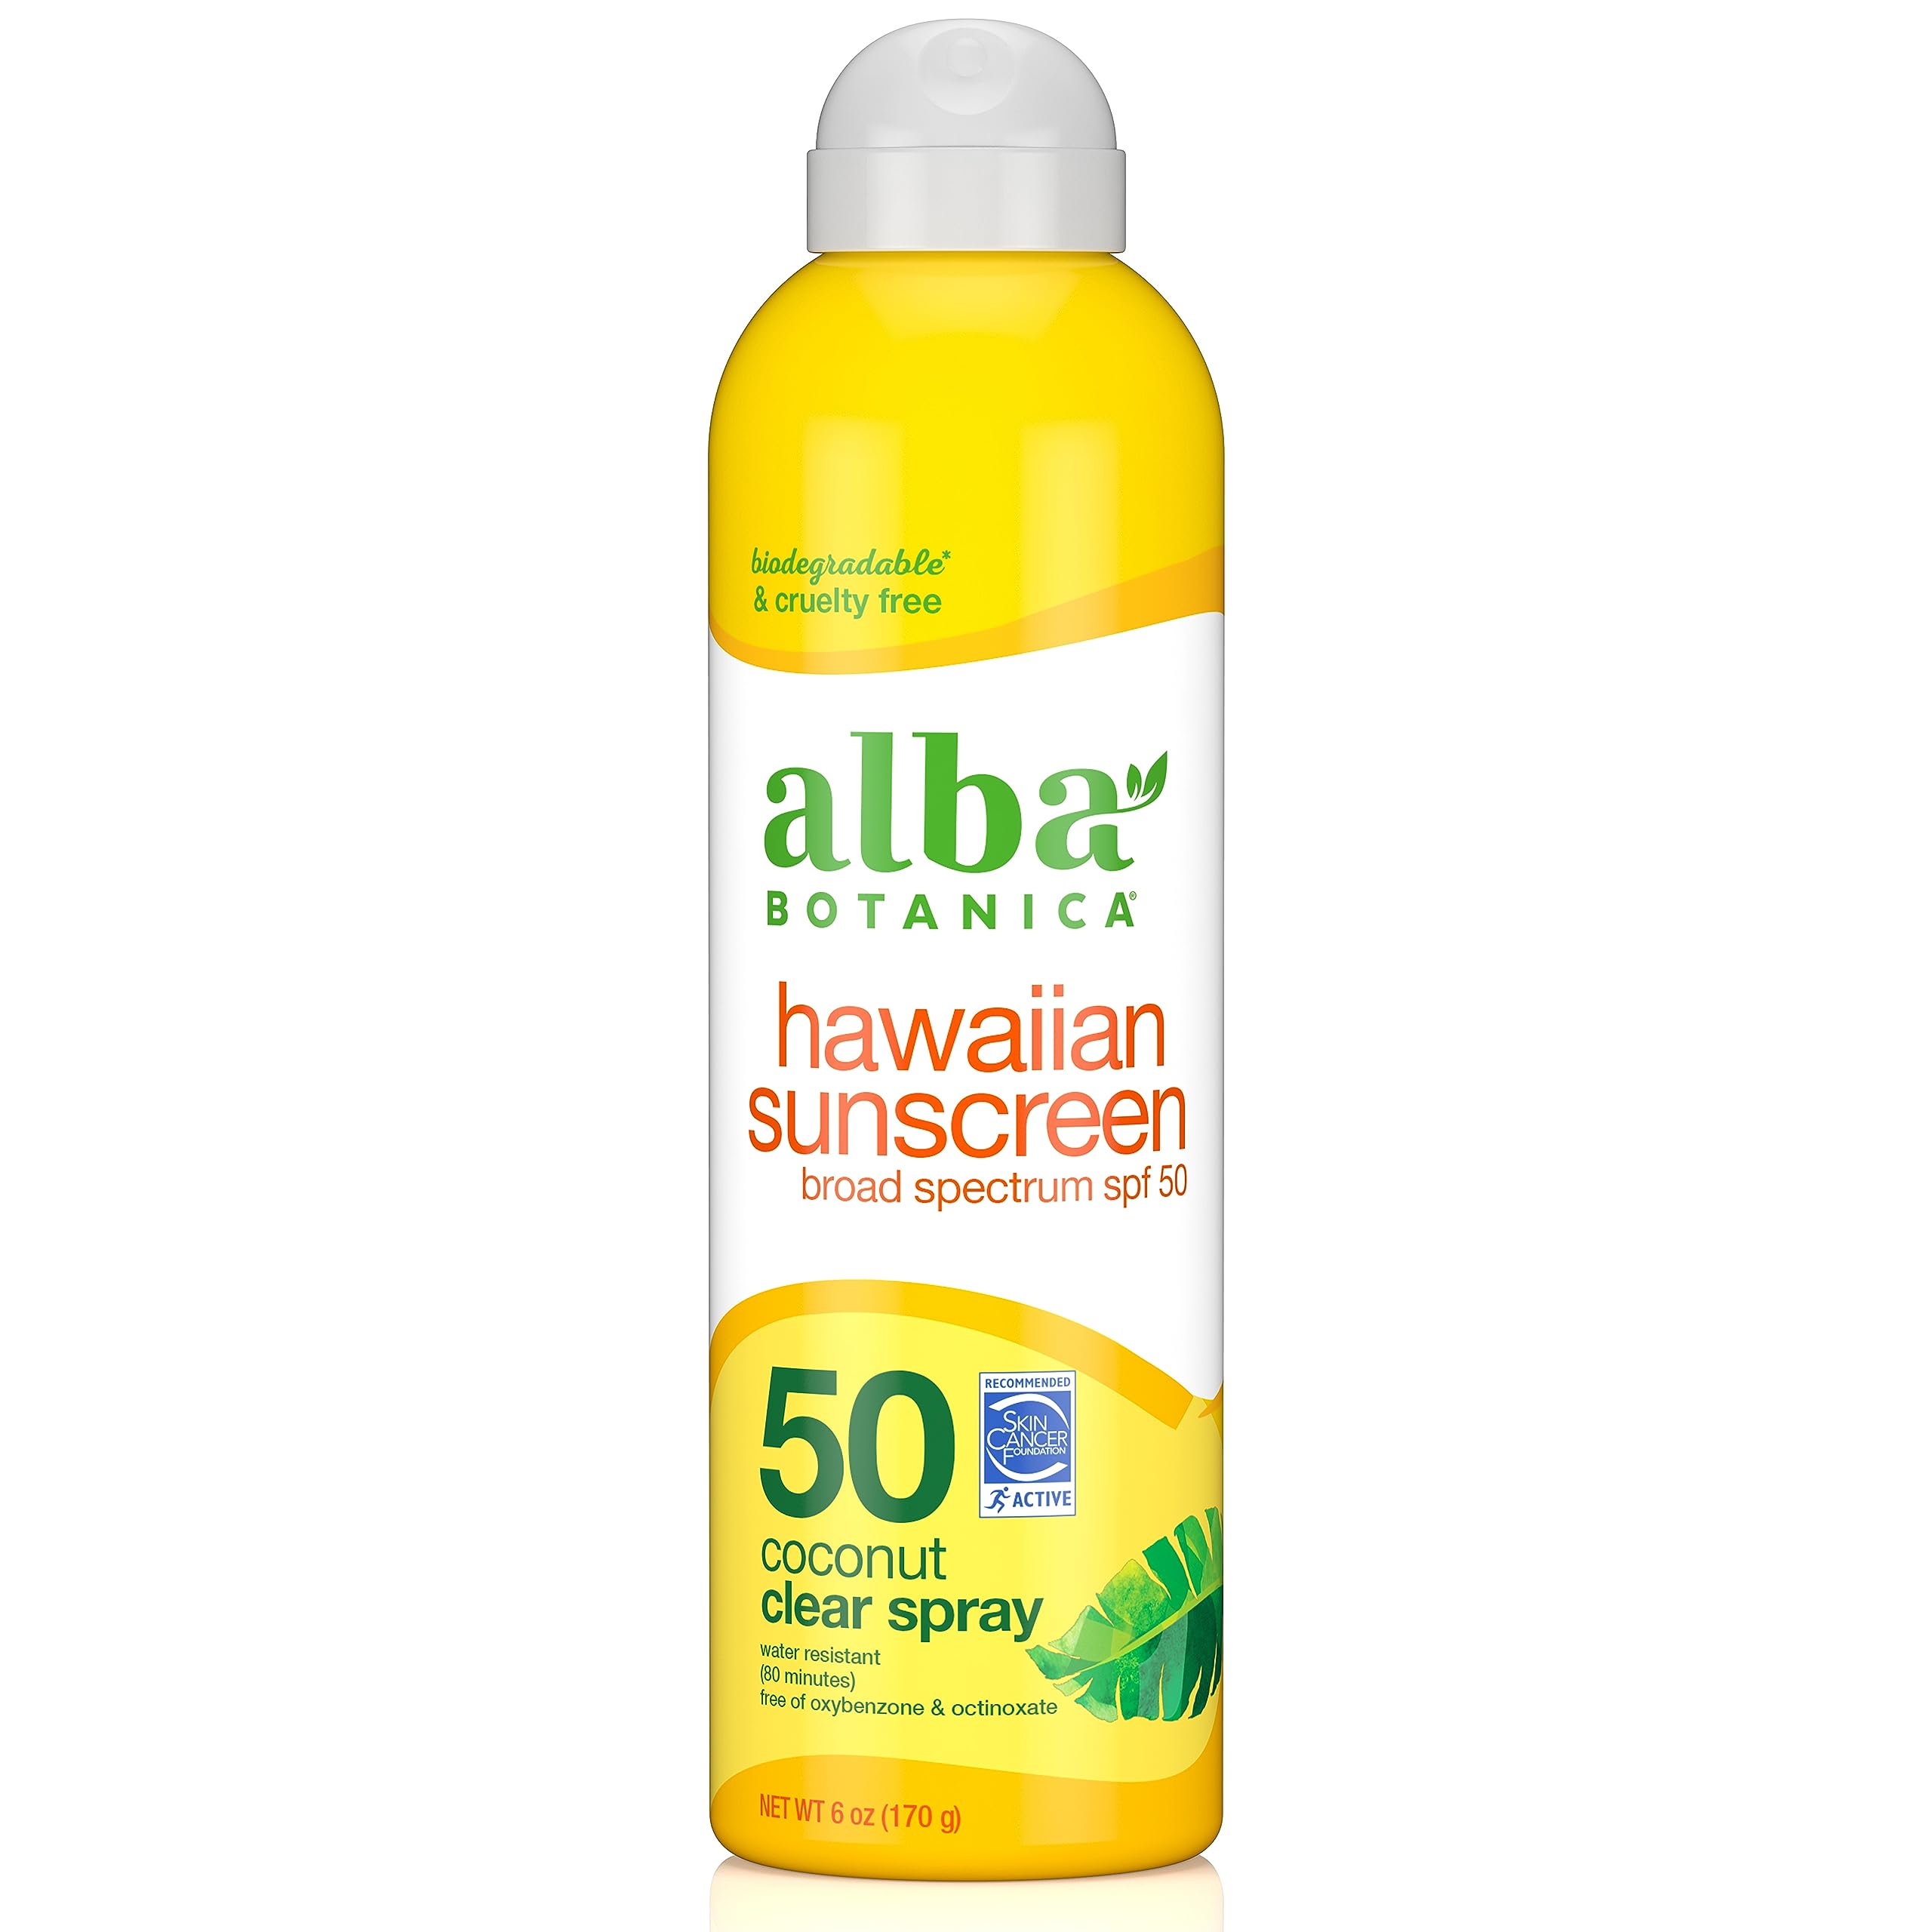 Alba Botanica Sunscreen for Face and Body, Hawaiian Coconut Sunscreen Spray, Broad Spectrum SPF 50 Sunscreen, Water Resistant and Biodegradable, 6 fl. oz. Bottle